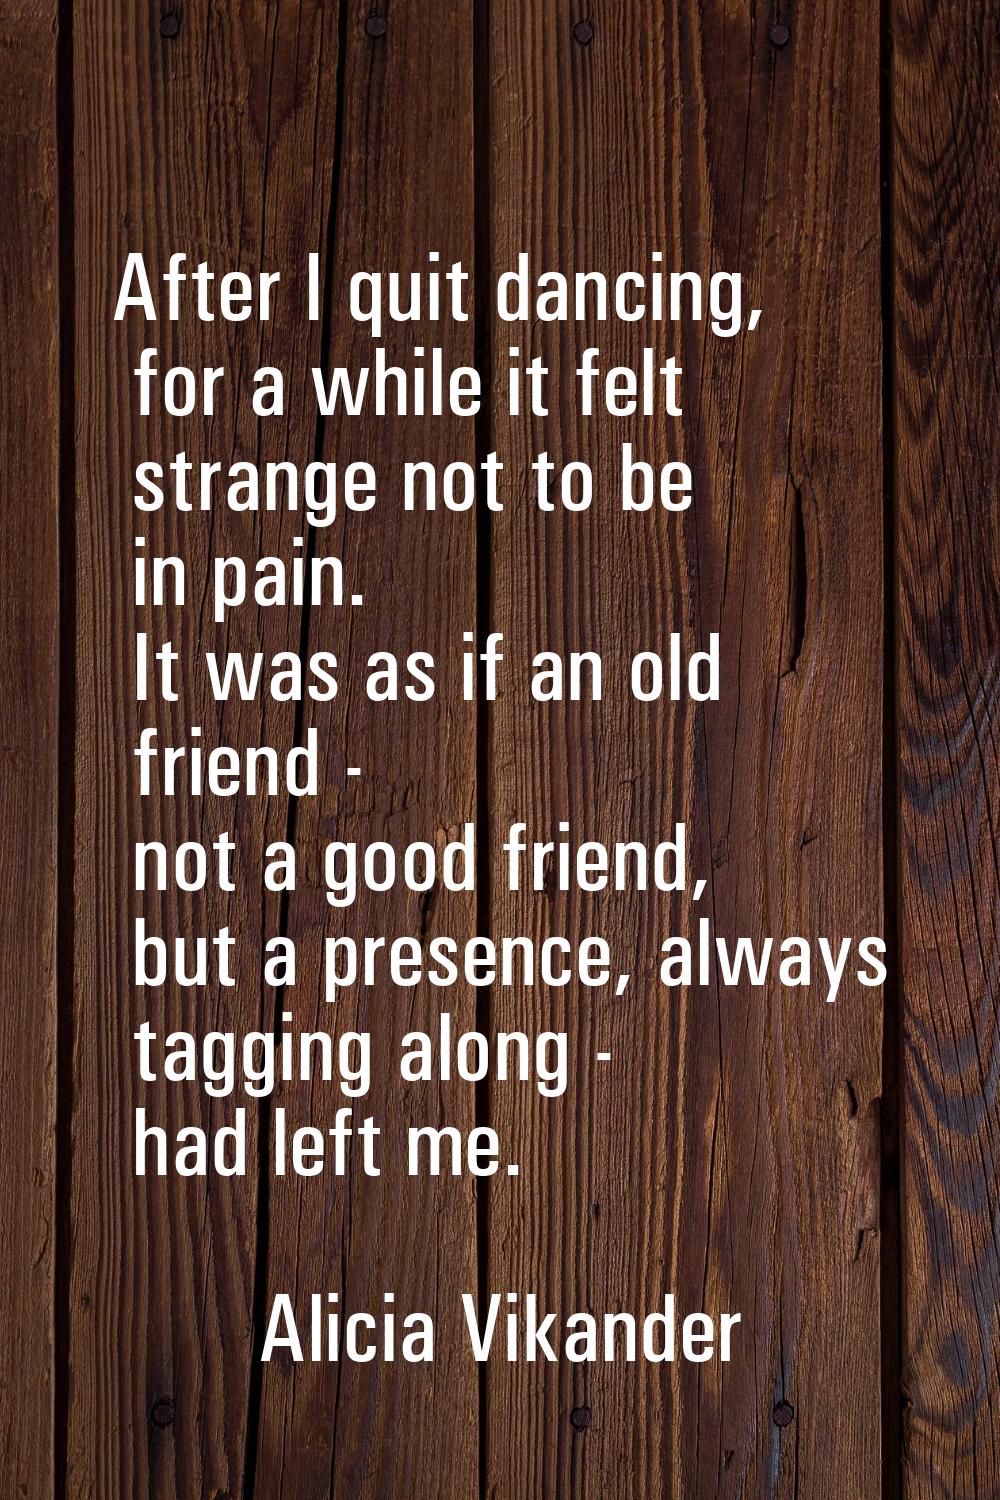 After I quit dancing, for a while it felt strange not to be in pain. It was as if an old friend - n